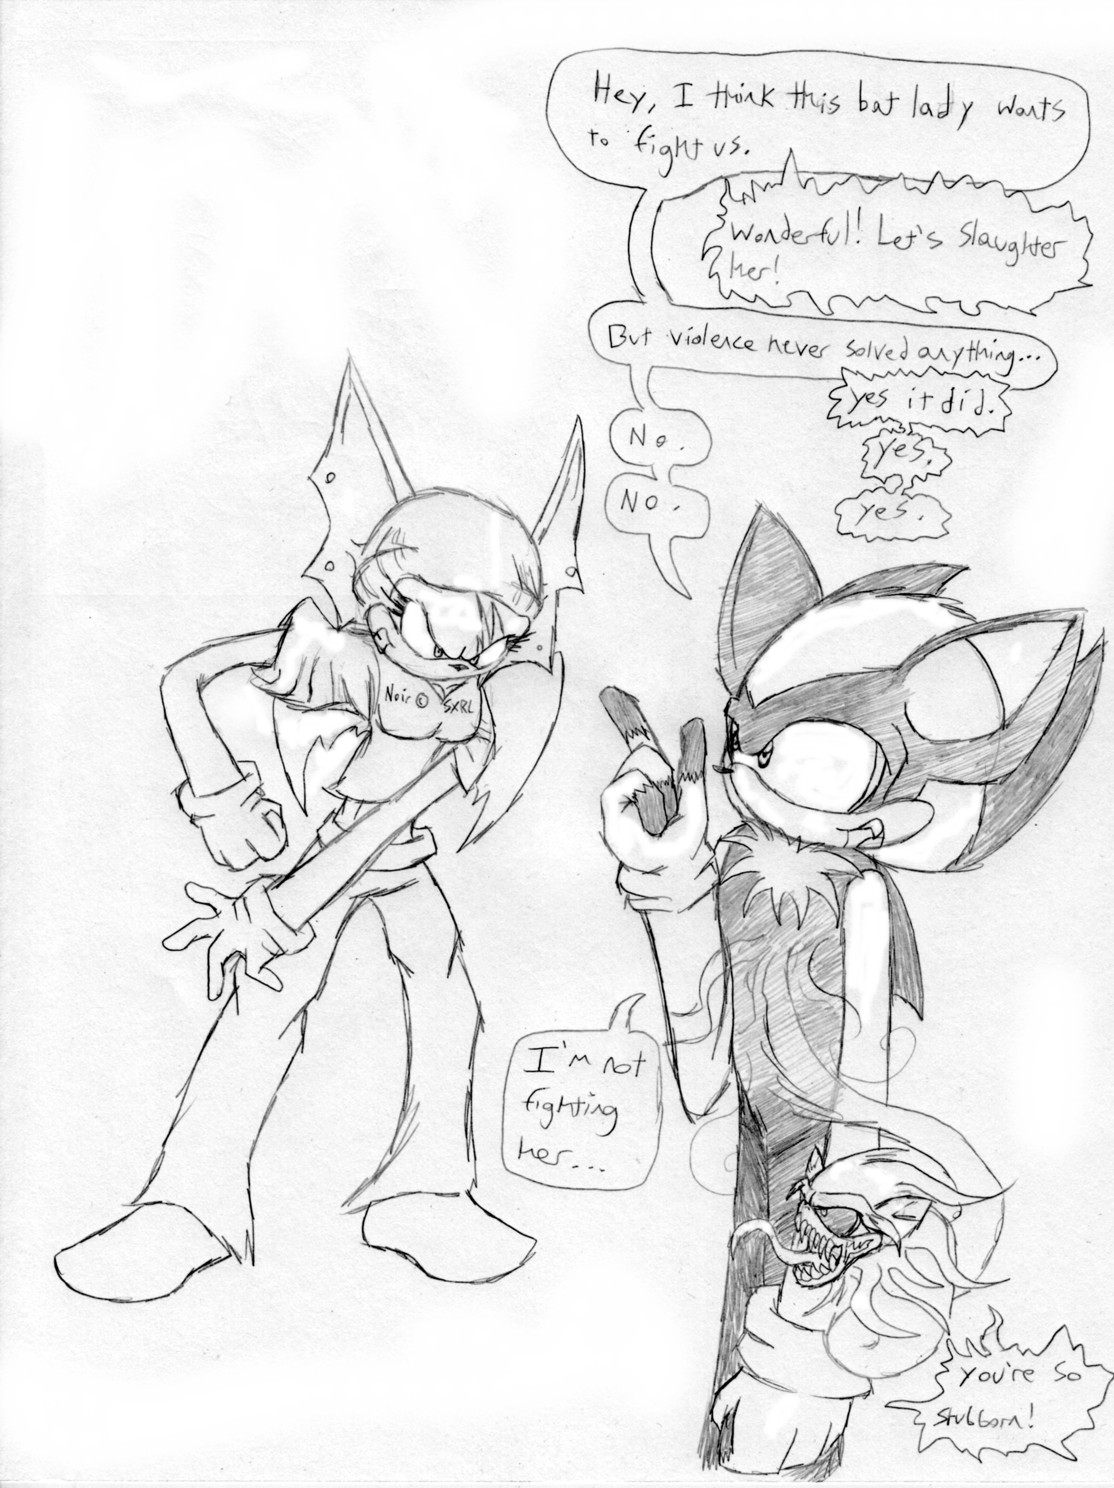 Noir Tries to Fight Eclipse by TheGameArtCritic